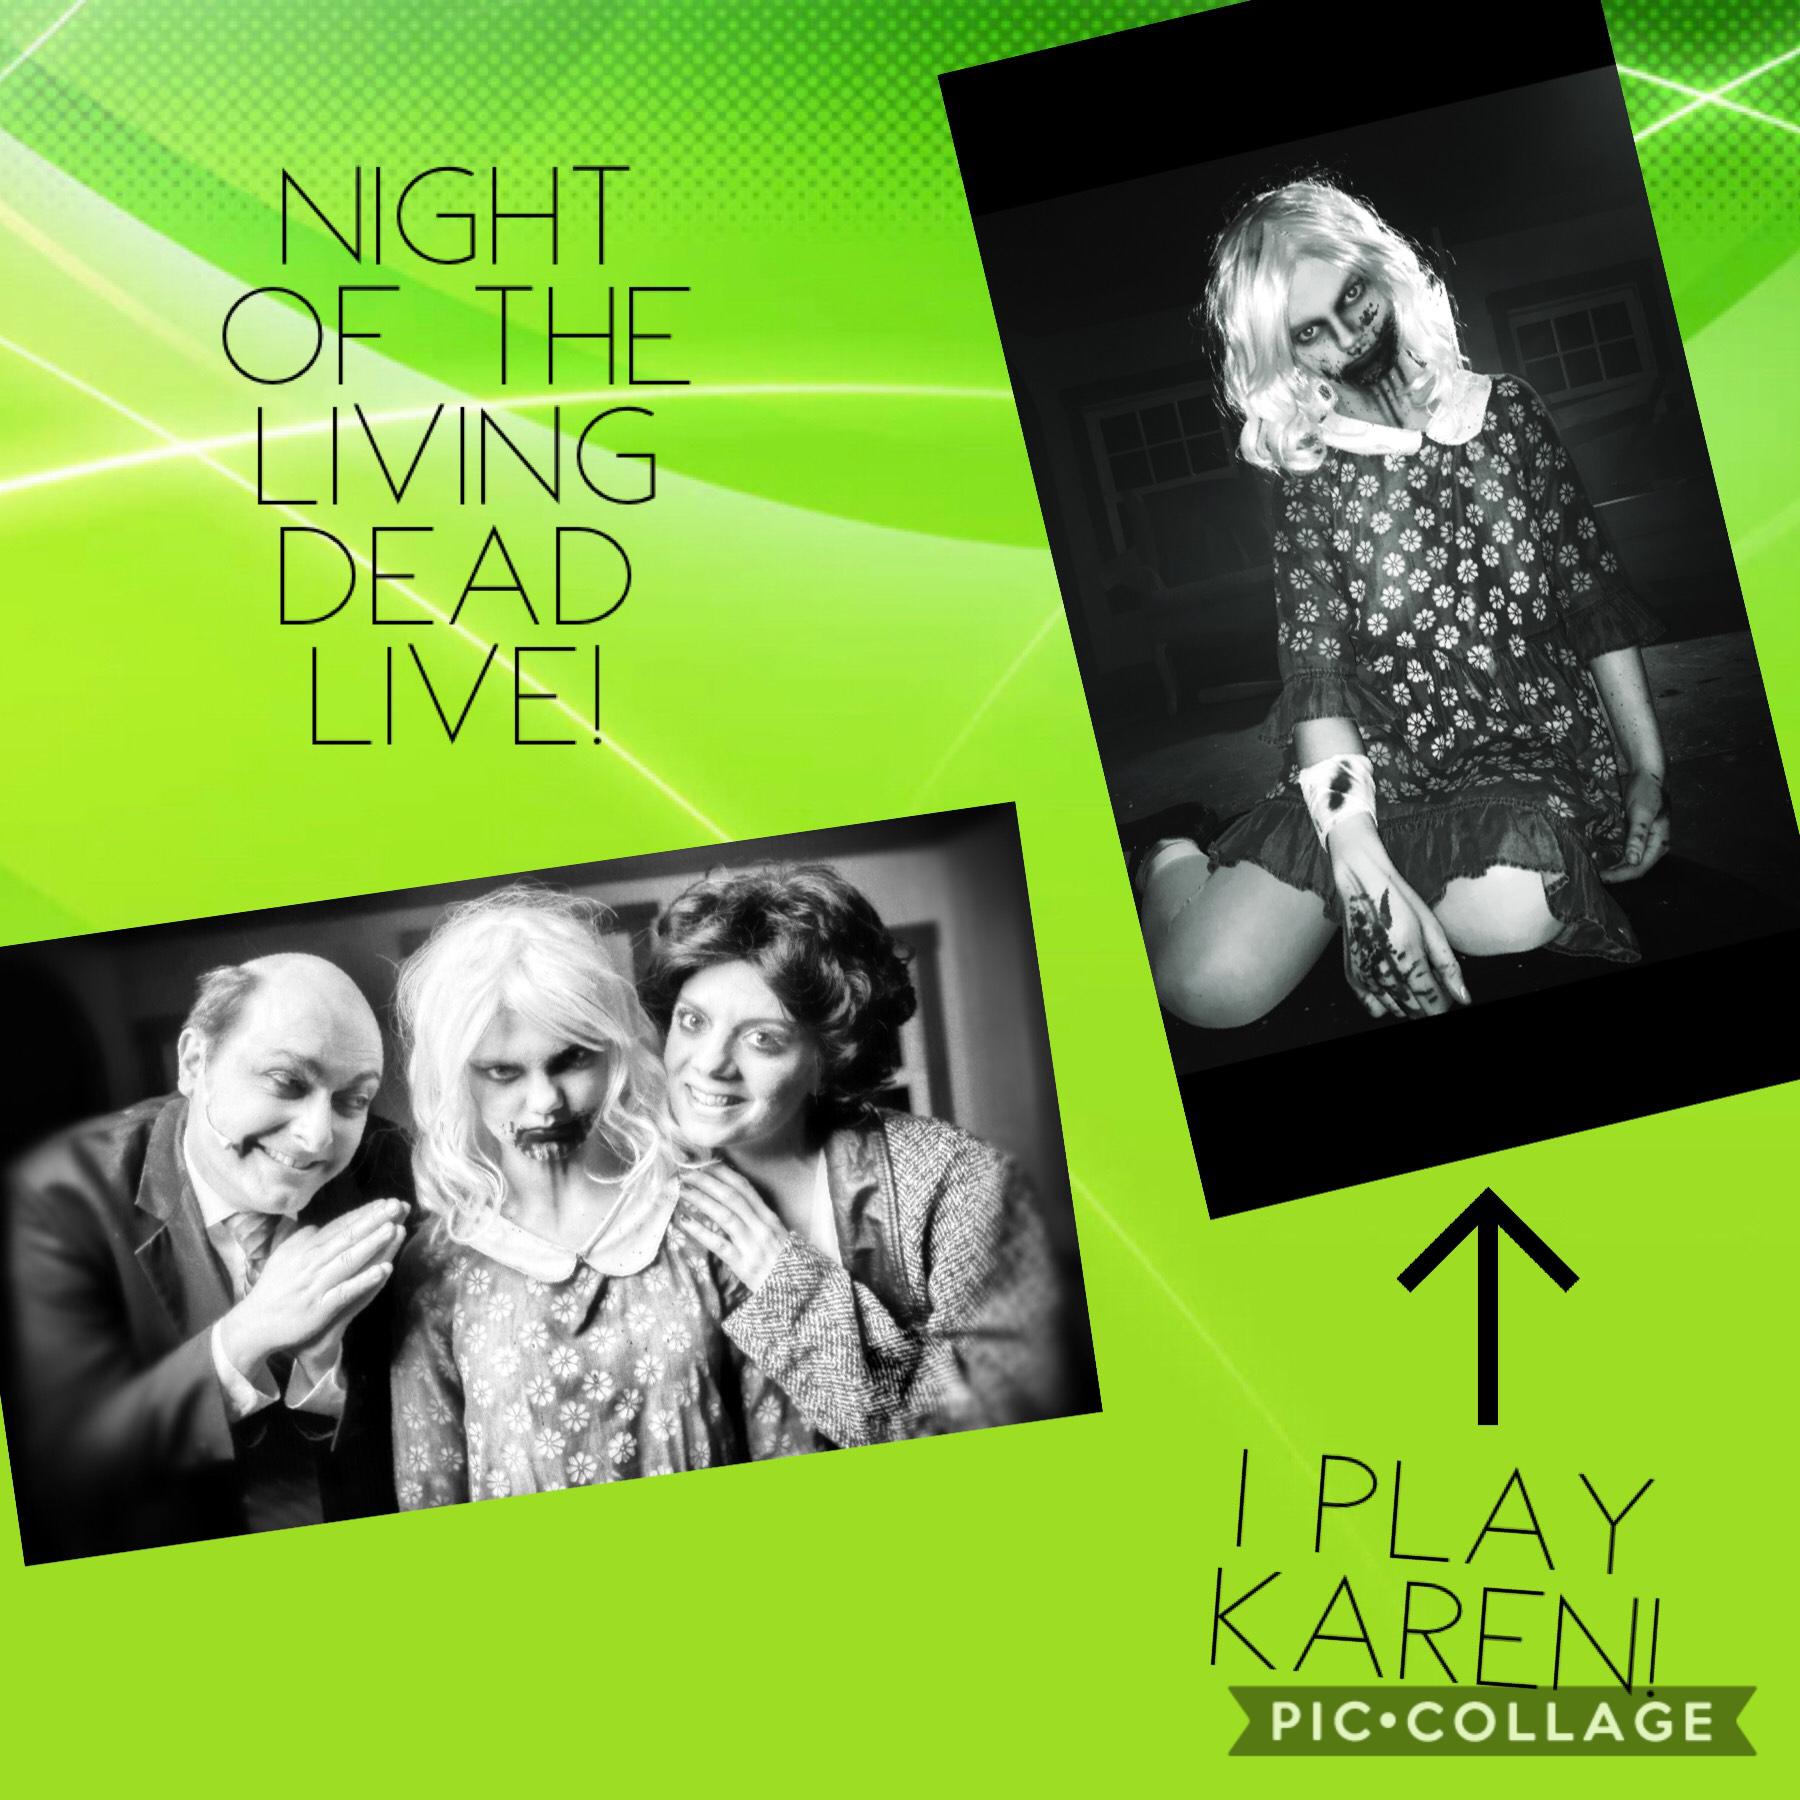 To get more information go to Night of the living dead KC there are only 6 more shows left!